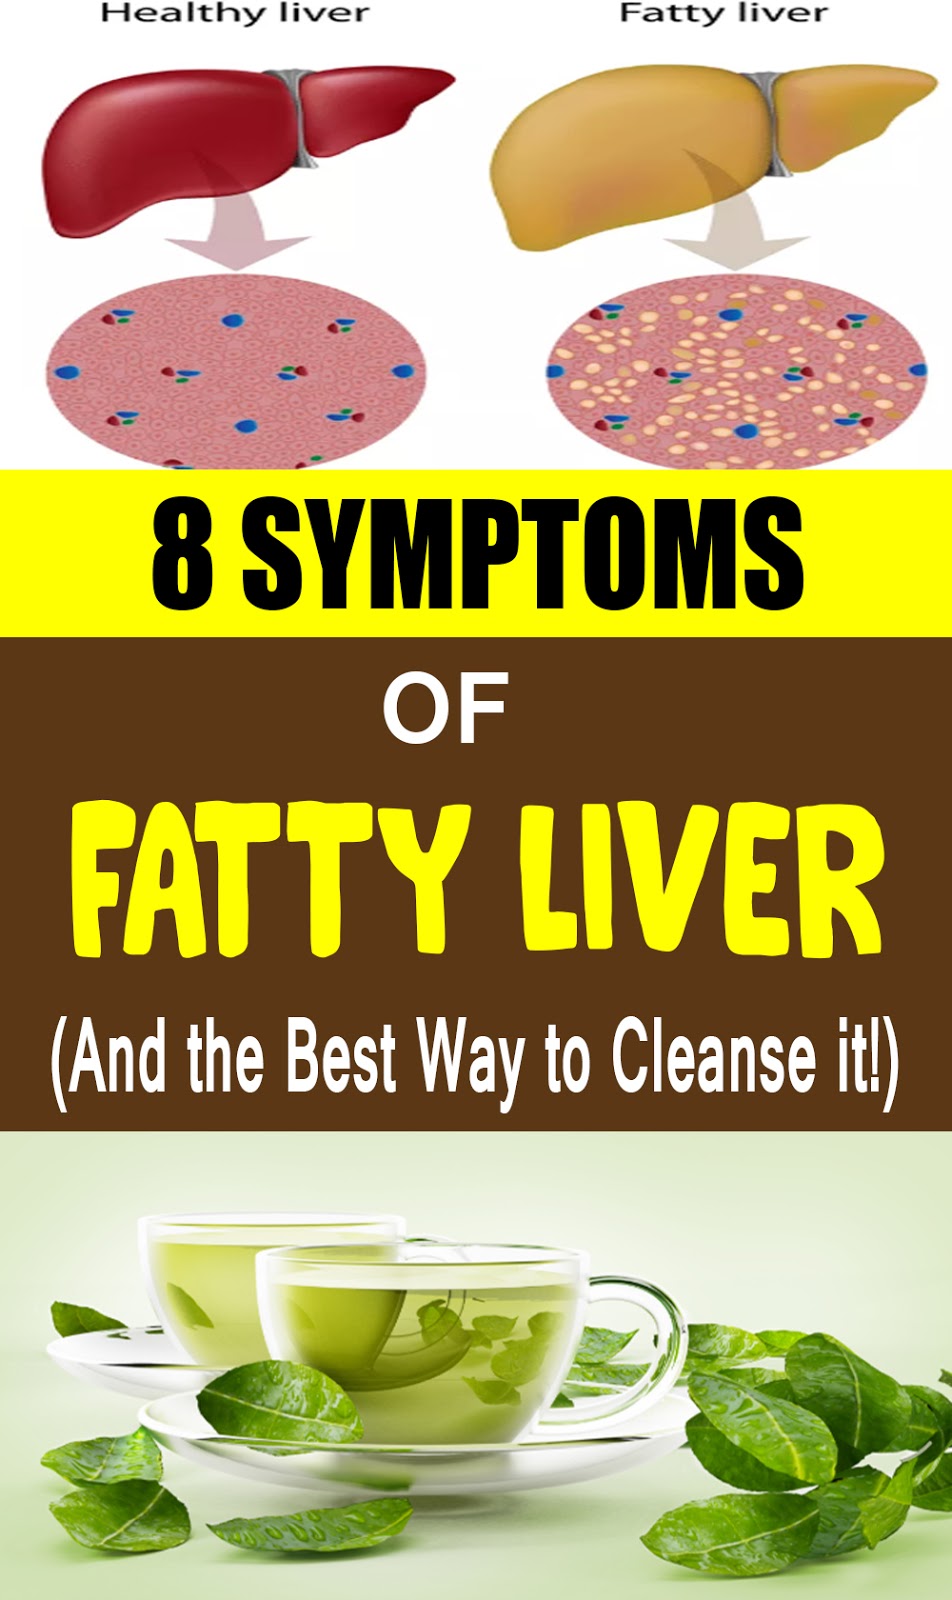 8 Common Symptoms of Fatty Liver (And the Best Way to Cleanse it!)